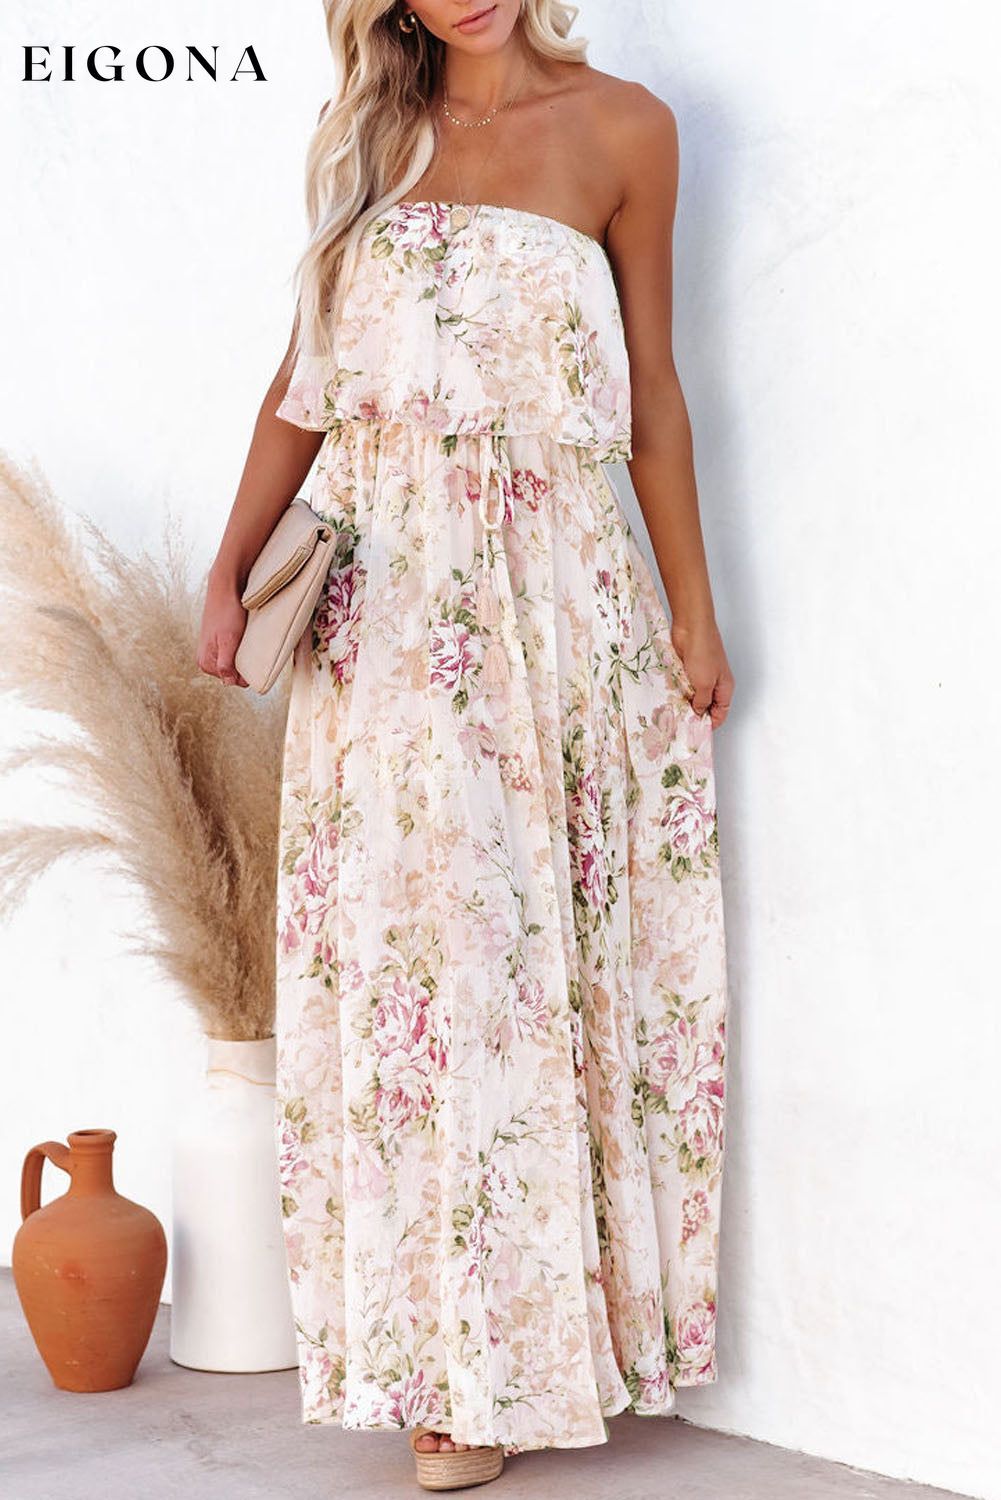 Pink Floral Print Strapless Tube Top Maxi Dress casual dress casual dresses clothes Detail Ruffle dress dresses maxi dress Occasion Vacation Print Floral Season Summer Size S To 2XL Sleeve Sleeveless Style Bohemian Style Elegant